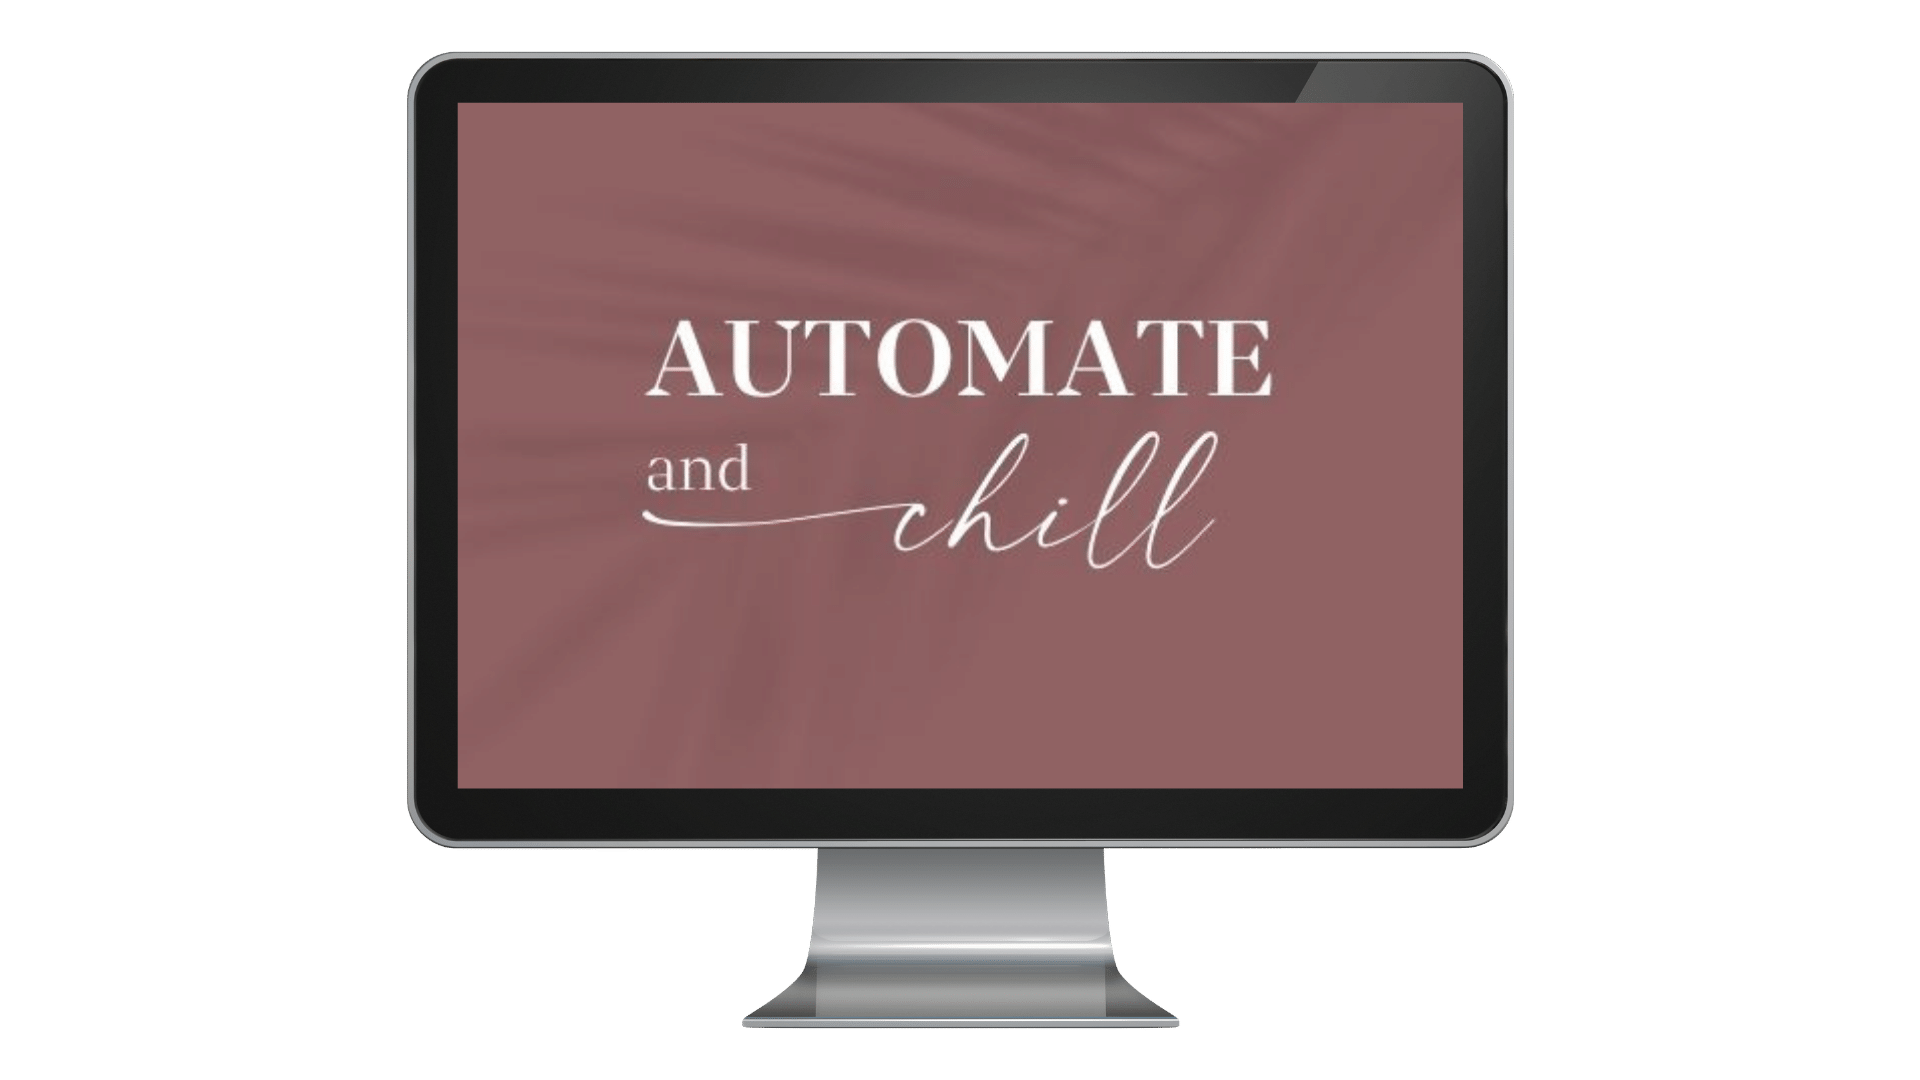 Automate and Chill